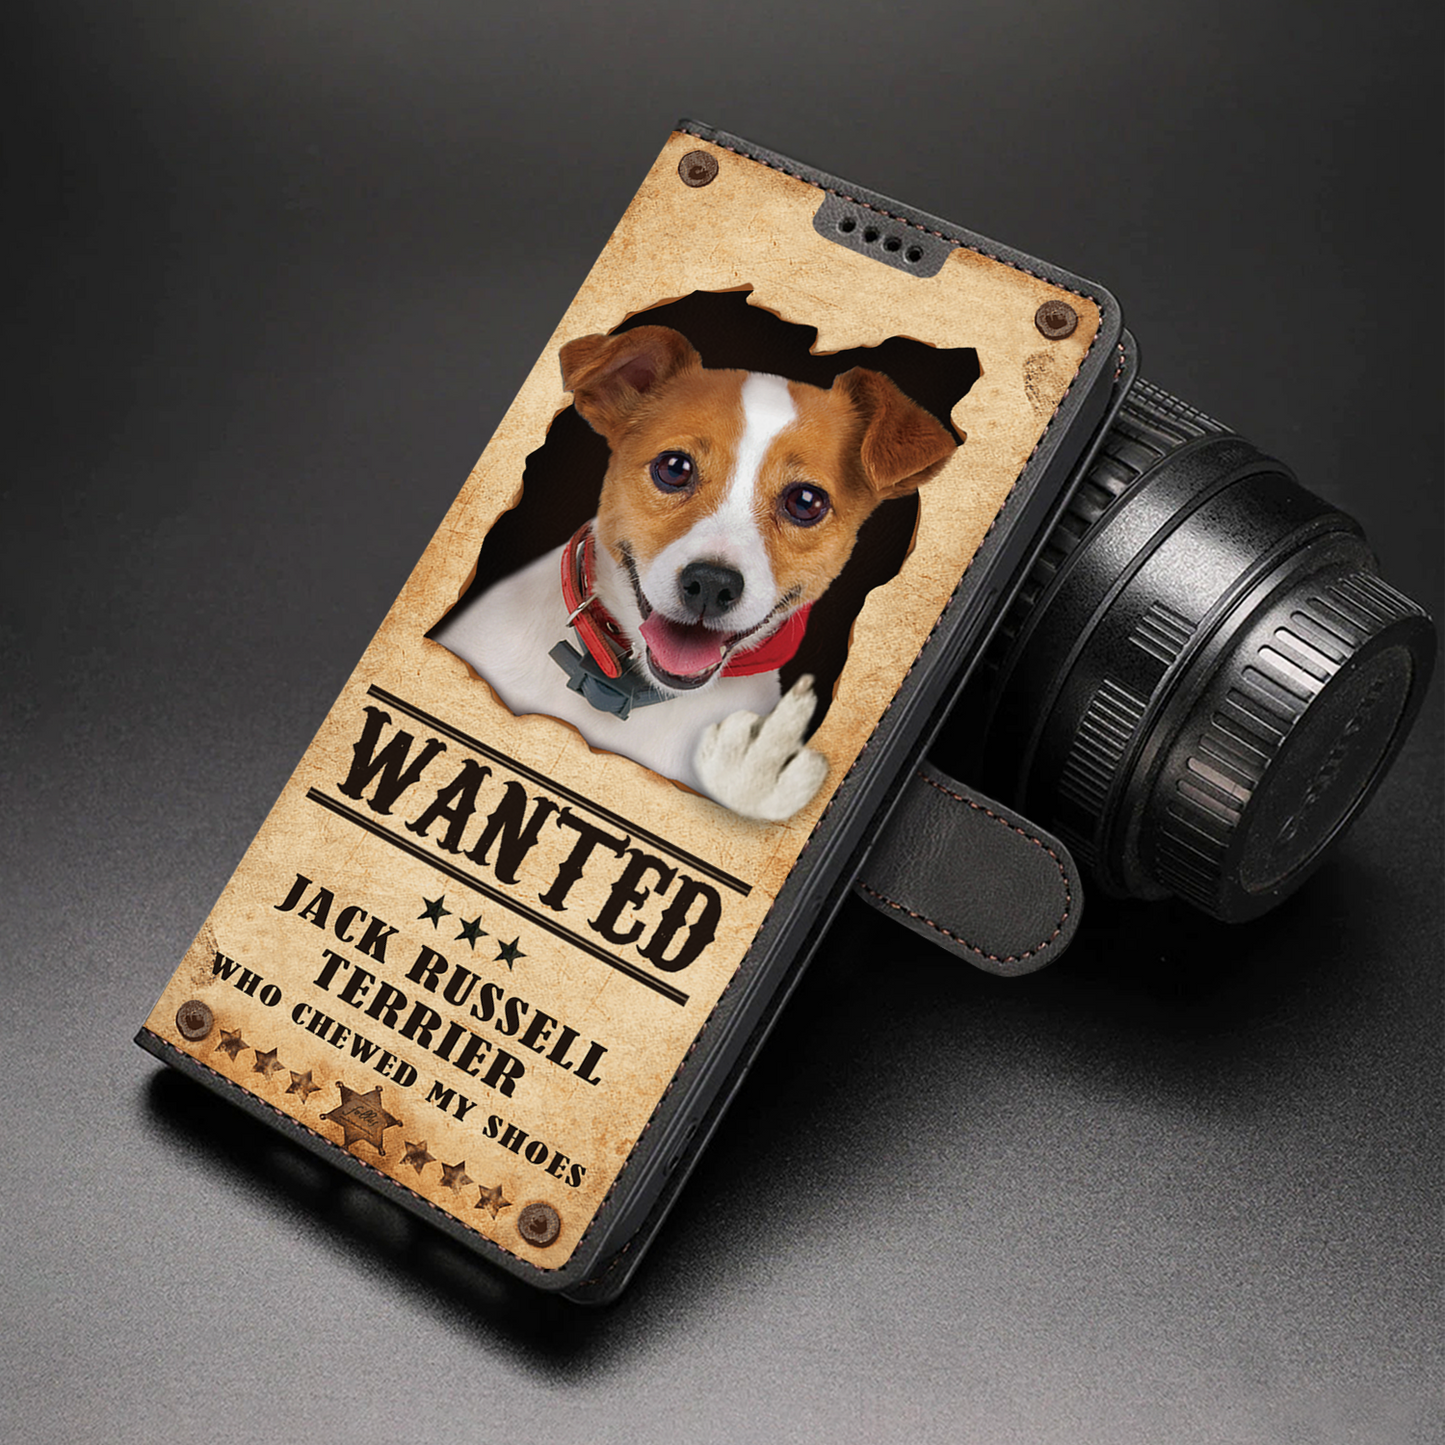 Jack Russell Terrier Wanted - Fun Wallet Phone Case V1